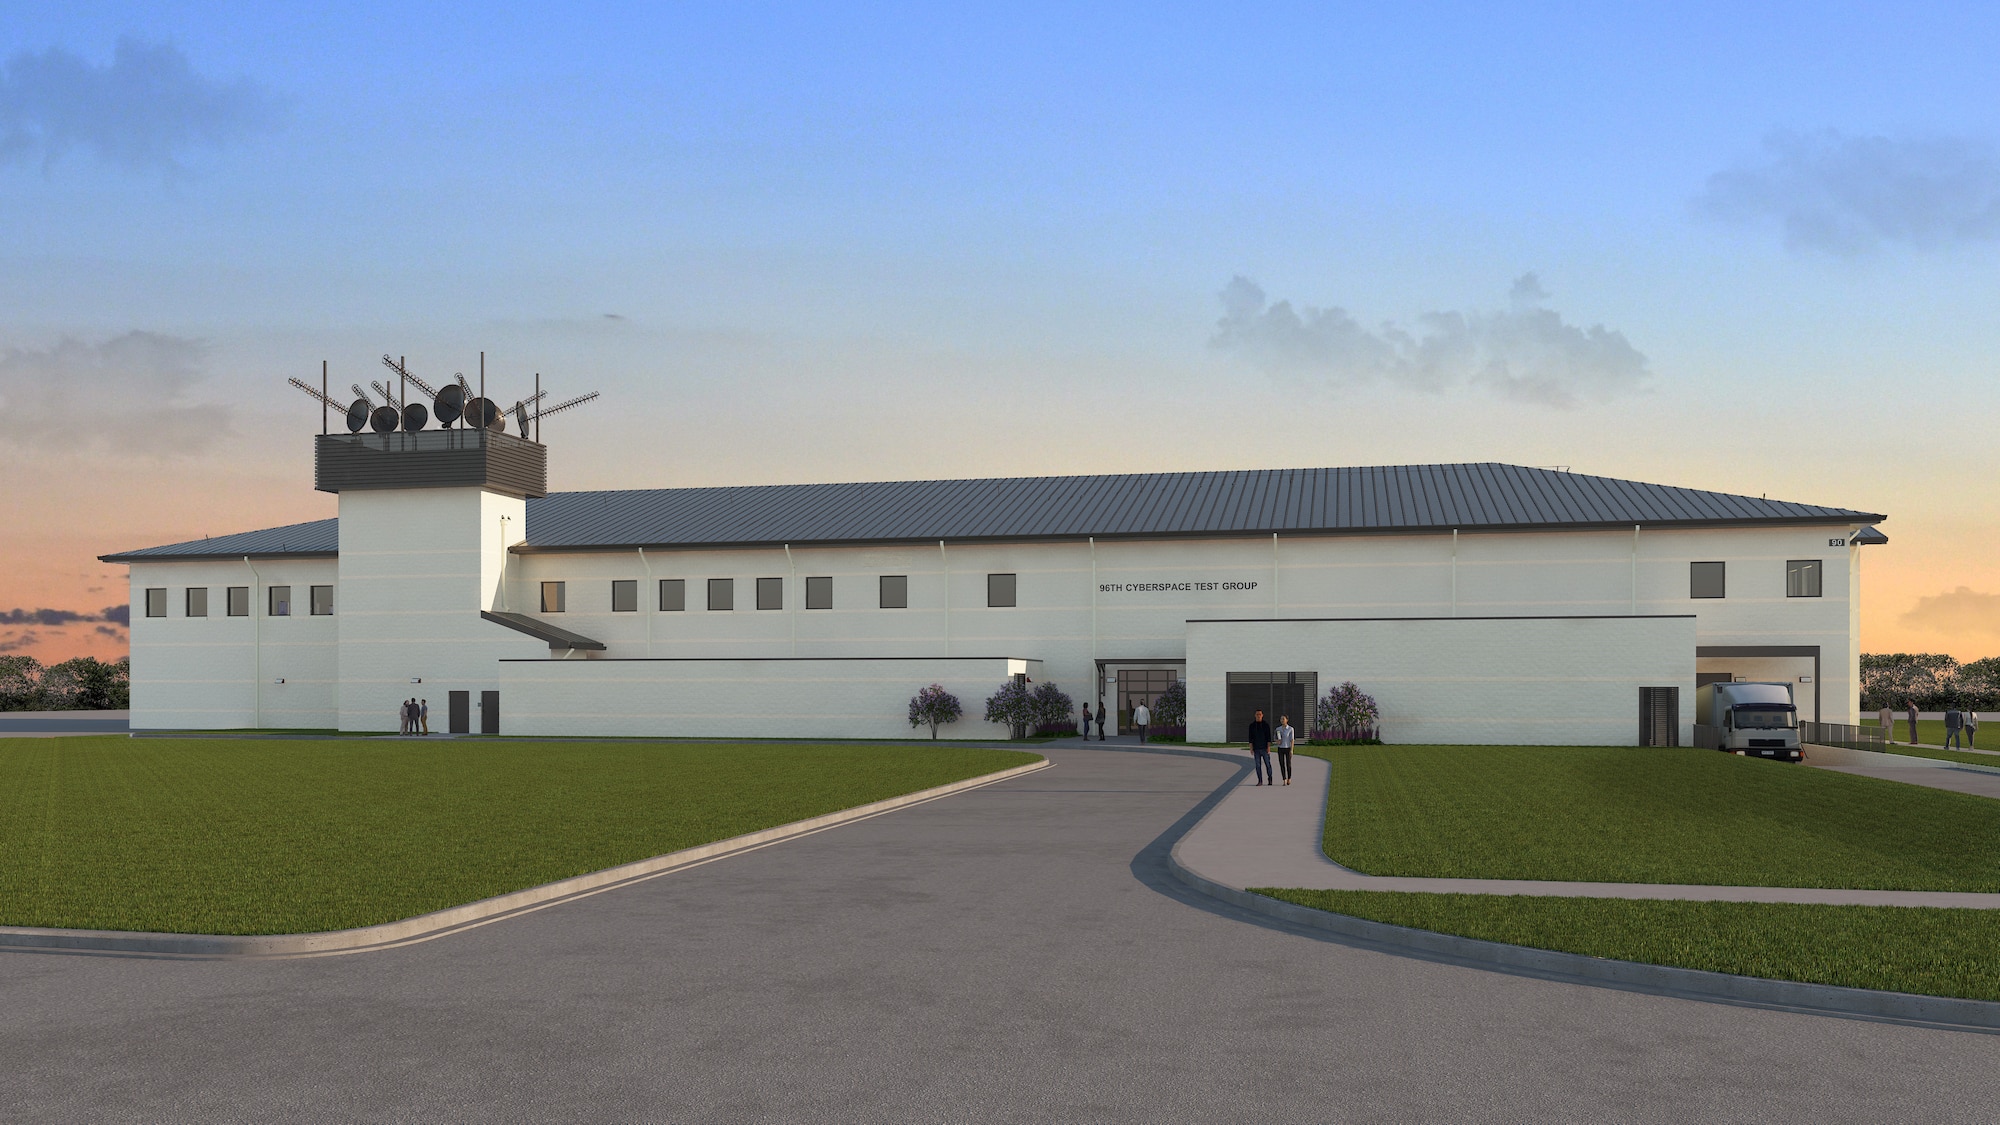 The Air Force Civil Engineer Center's Facility Engineering Directorate is leading the construction of the cyberspace test group facility at Eglin AFB, Florida.